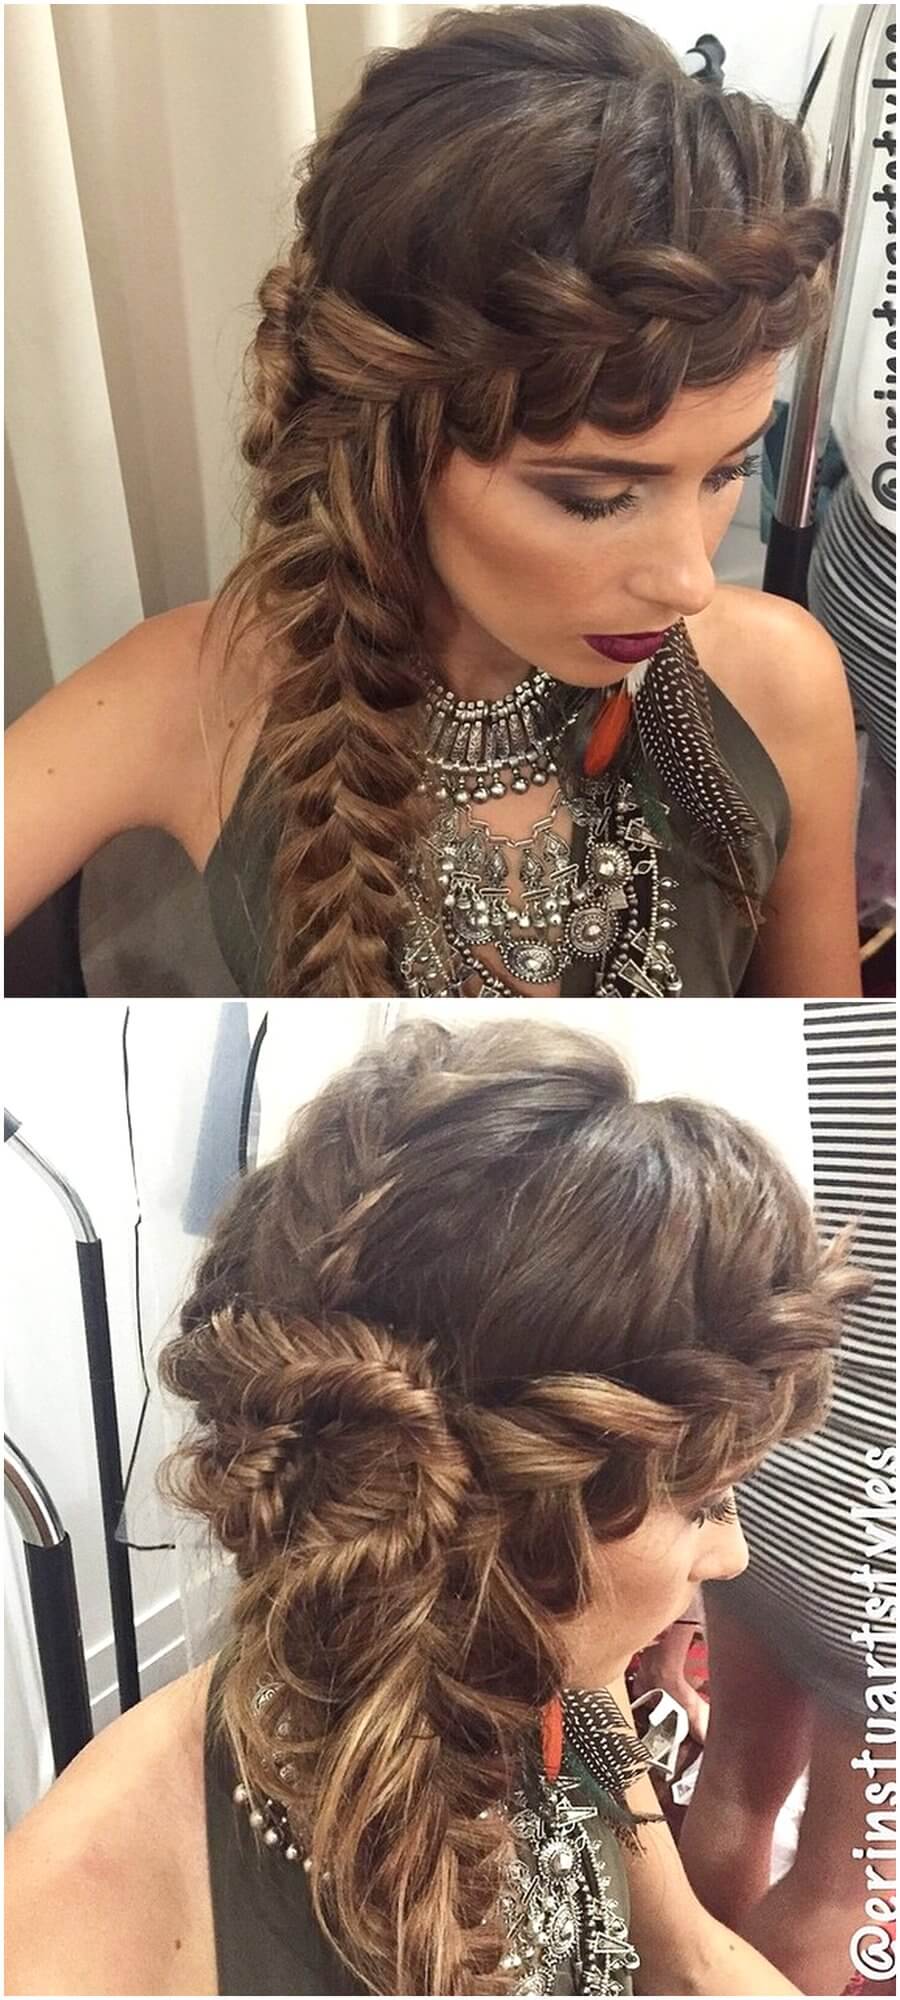 Cute Boho Style Girls Hair Styles For Any Kind of Hairs (10)